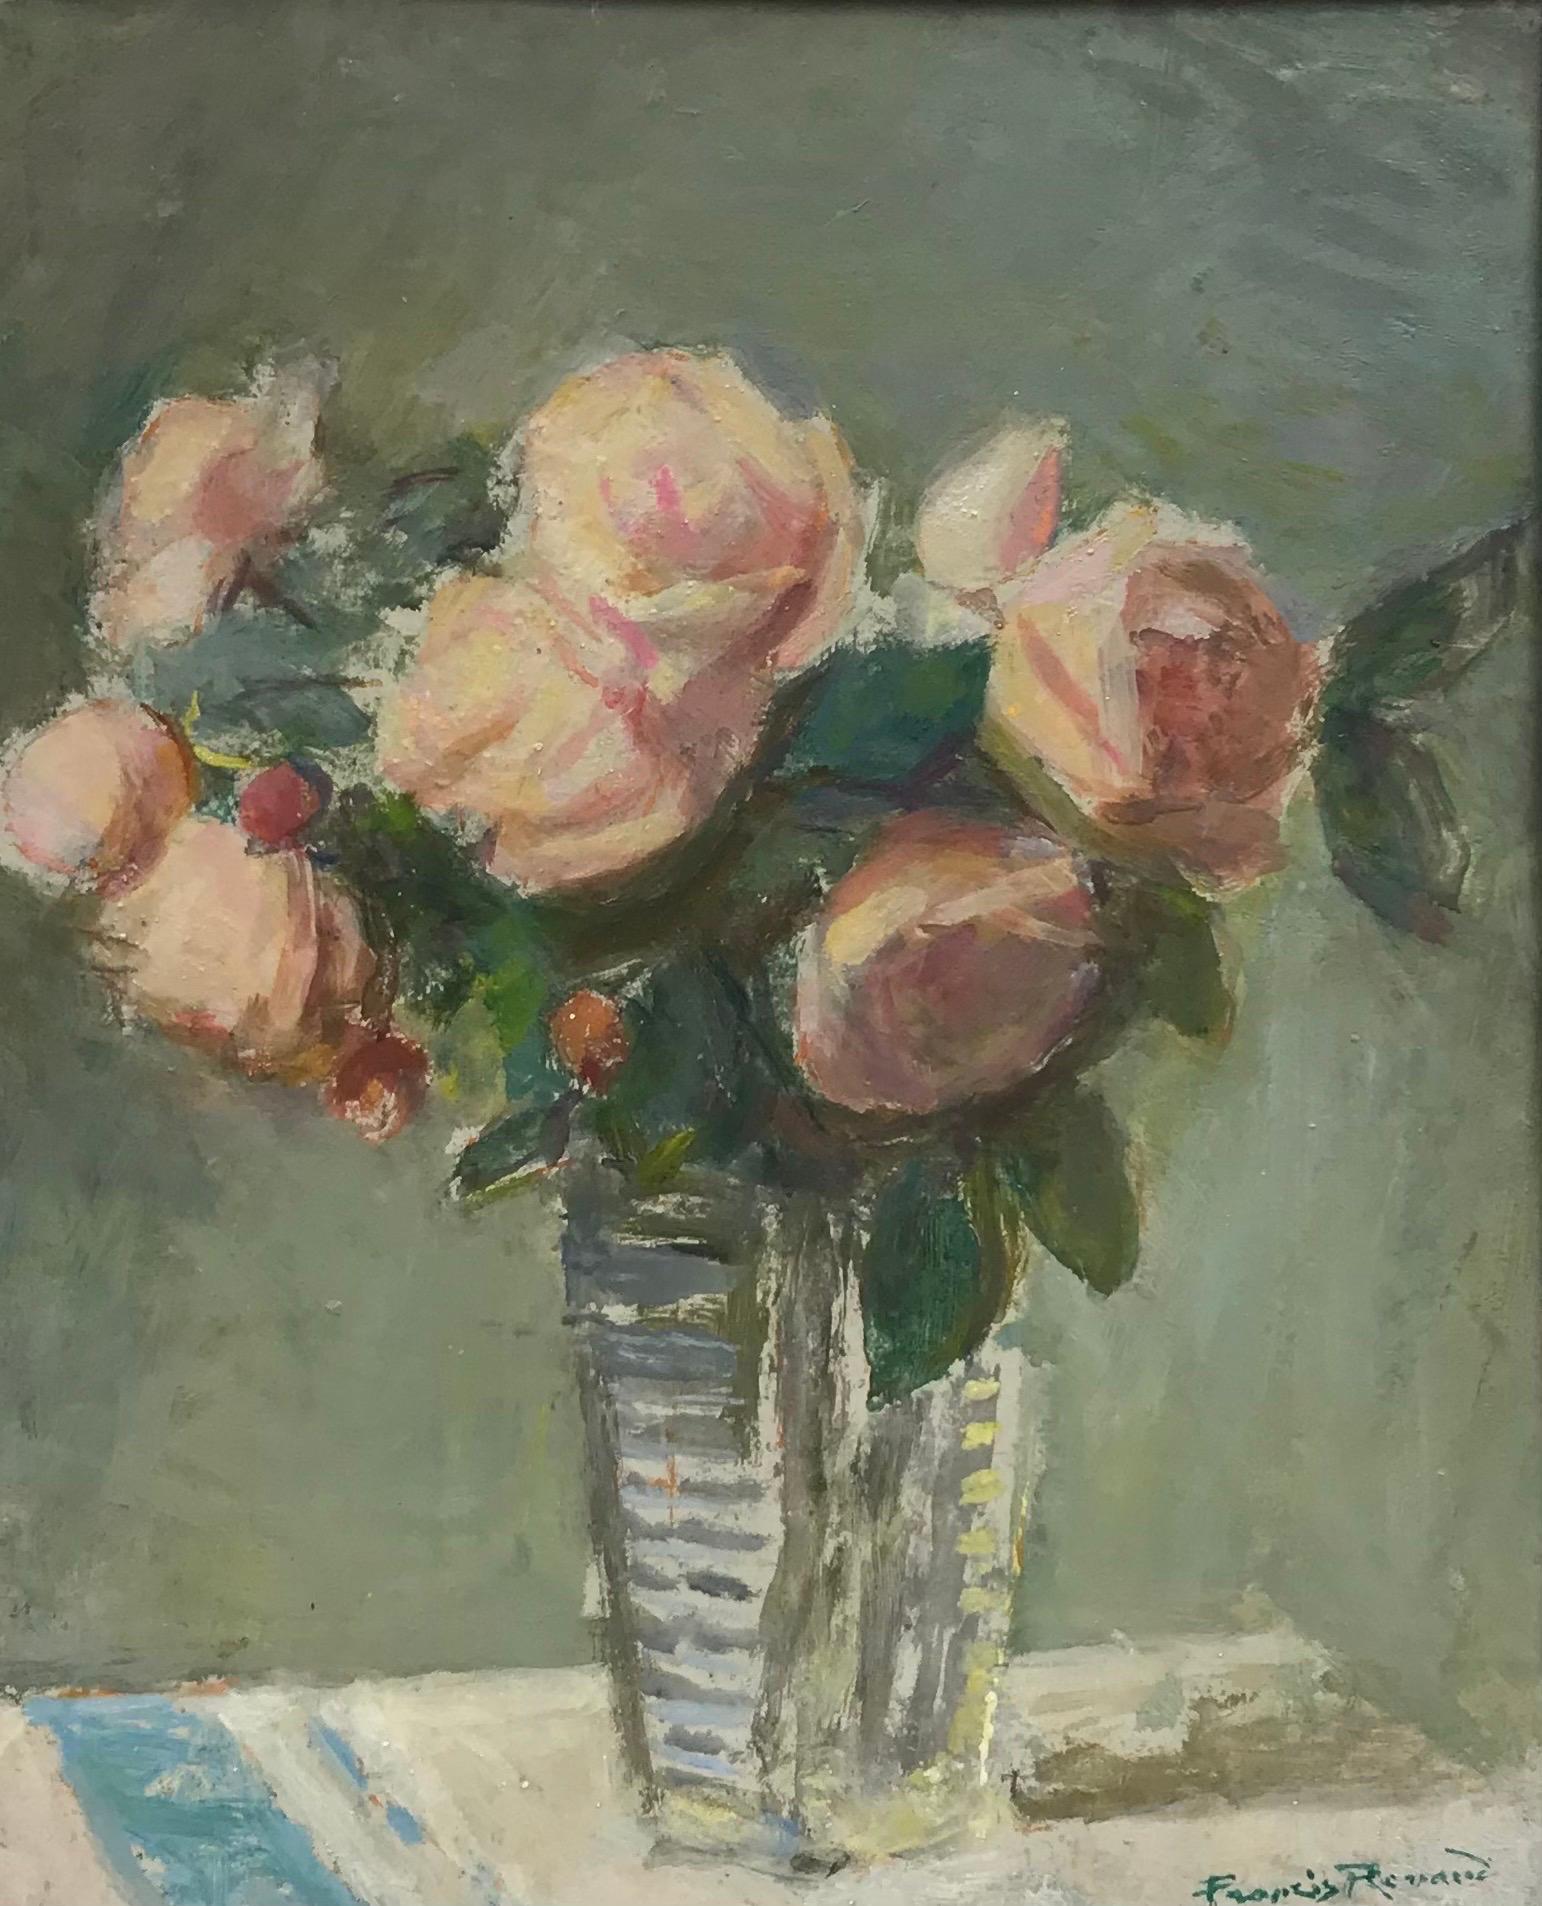 Fine Mid 20th Century French Impressionist Oil - Pink Roses in Vase, signed - Post-Impressionist Painting by 20th Century French School